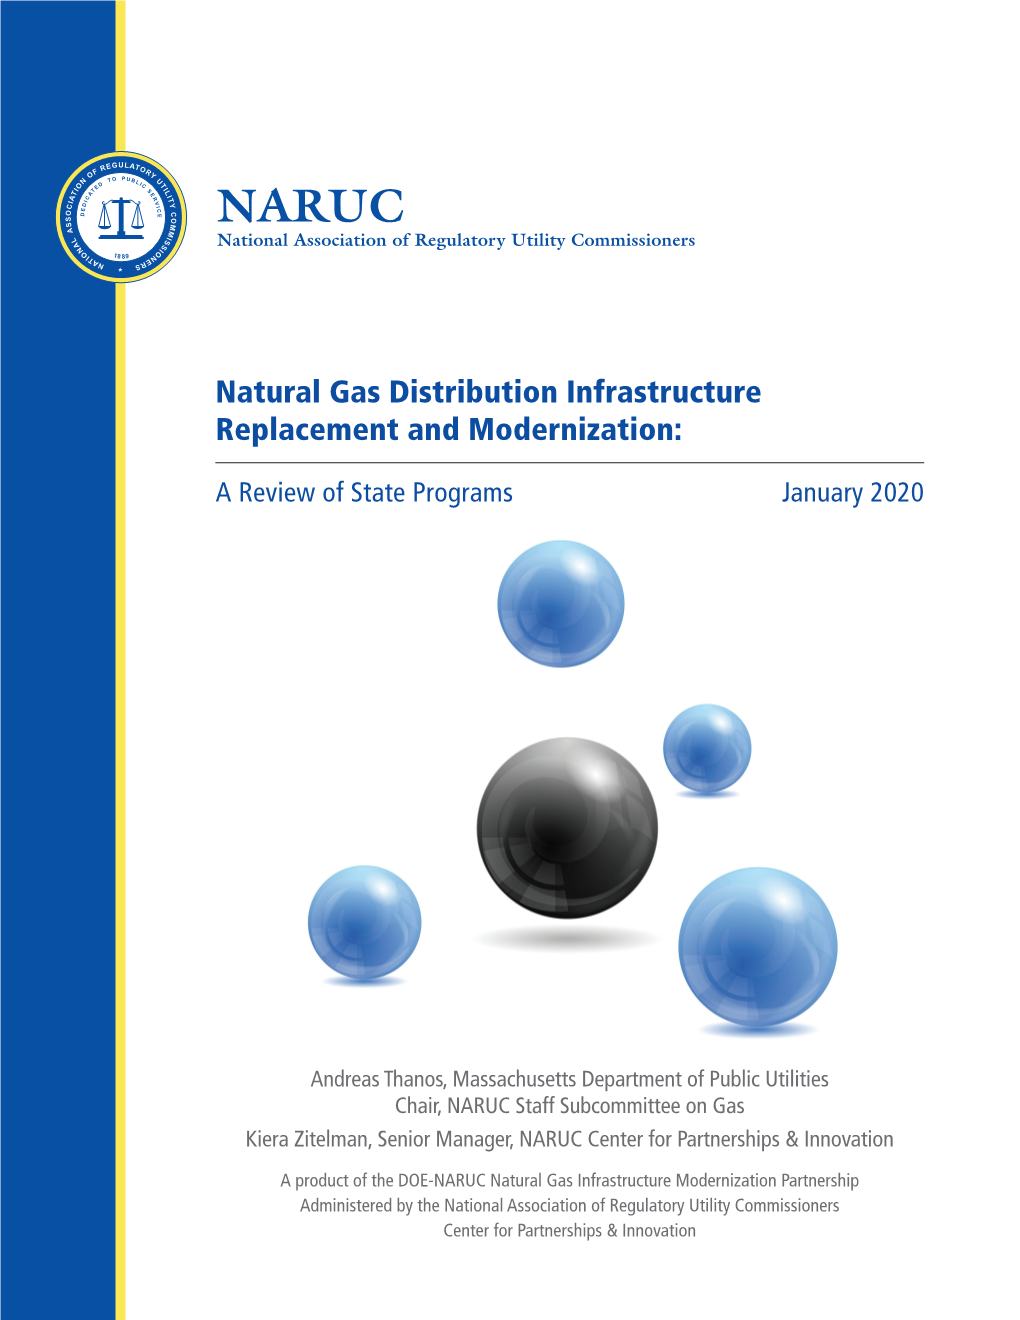 Natural Gas Distribution Infrastructure Replacement and Modernization